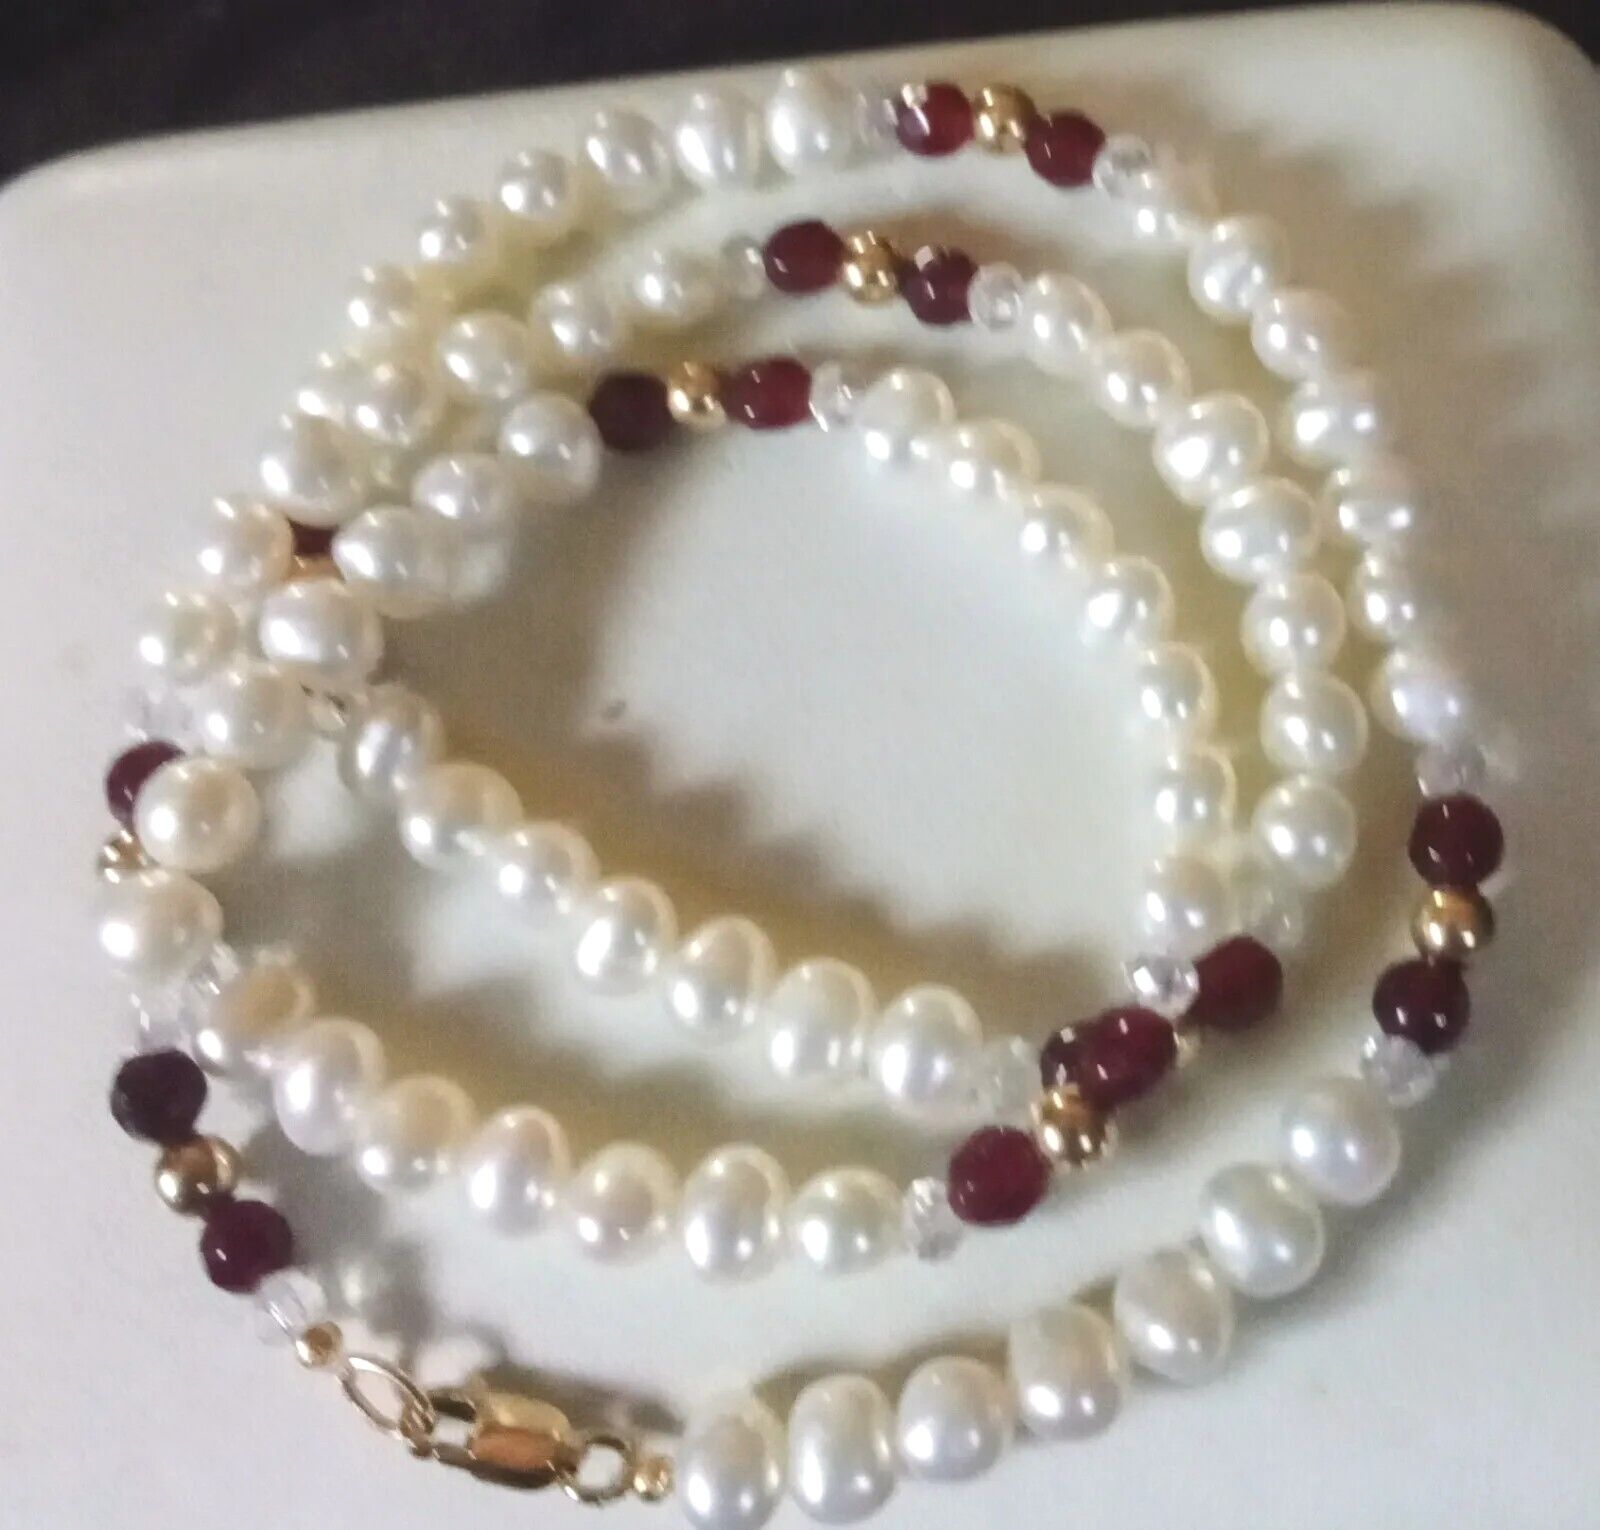 BEAUTIFUL 14k GF Pearl and Ruby Red Bead Necklace… - image 1